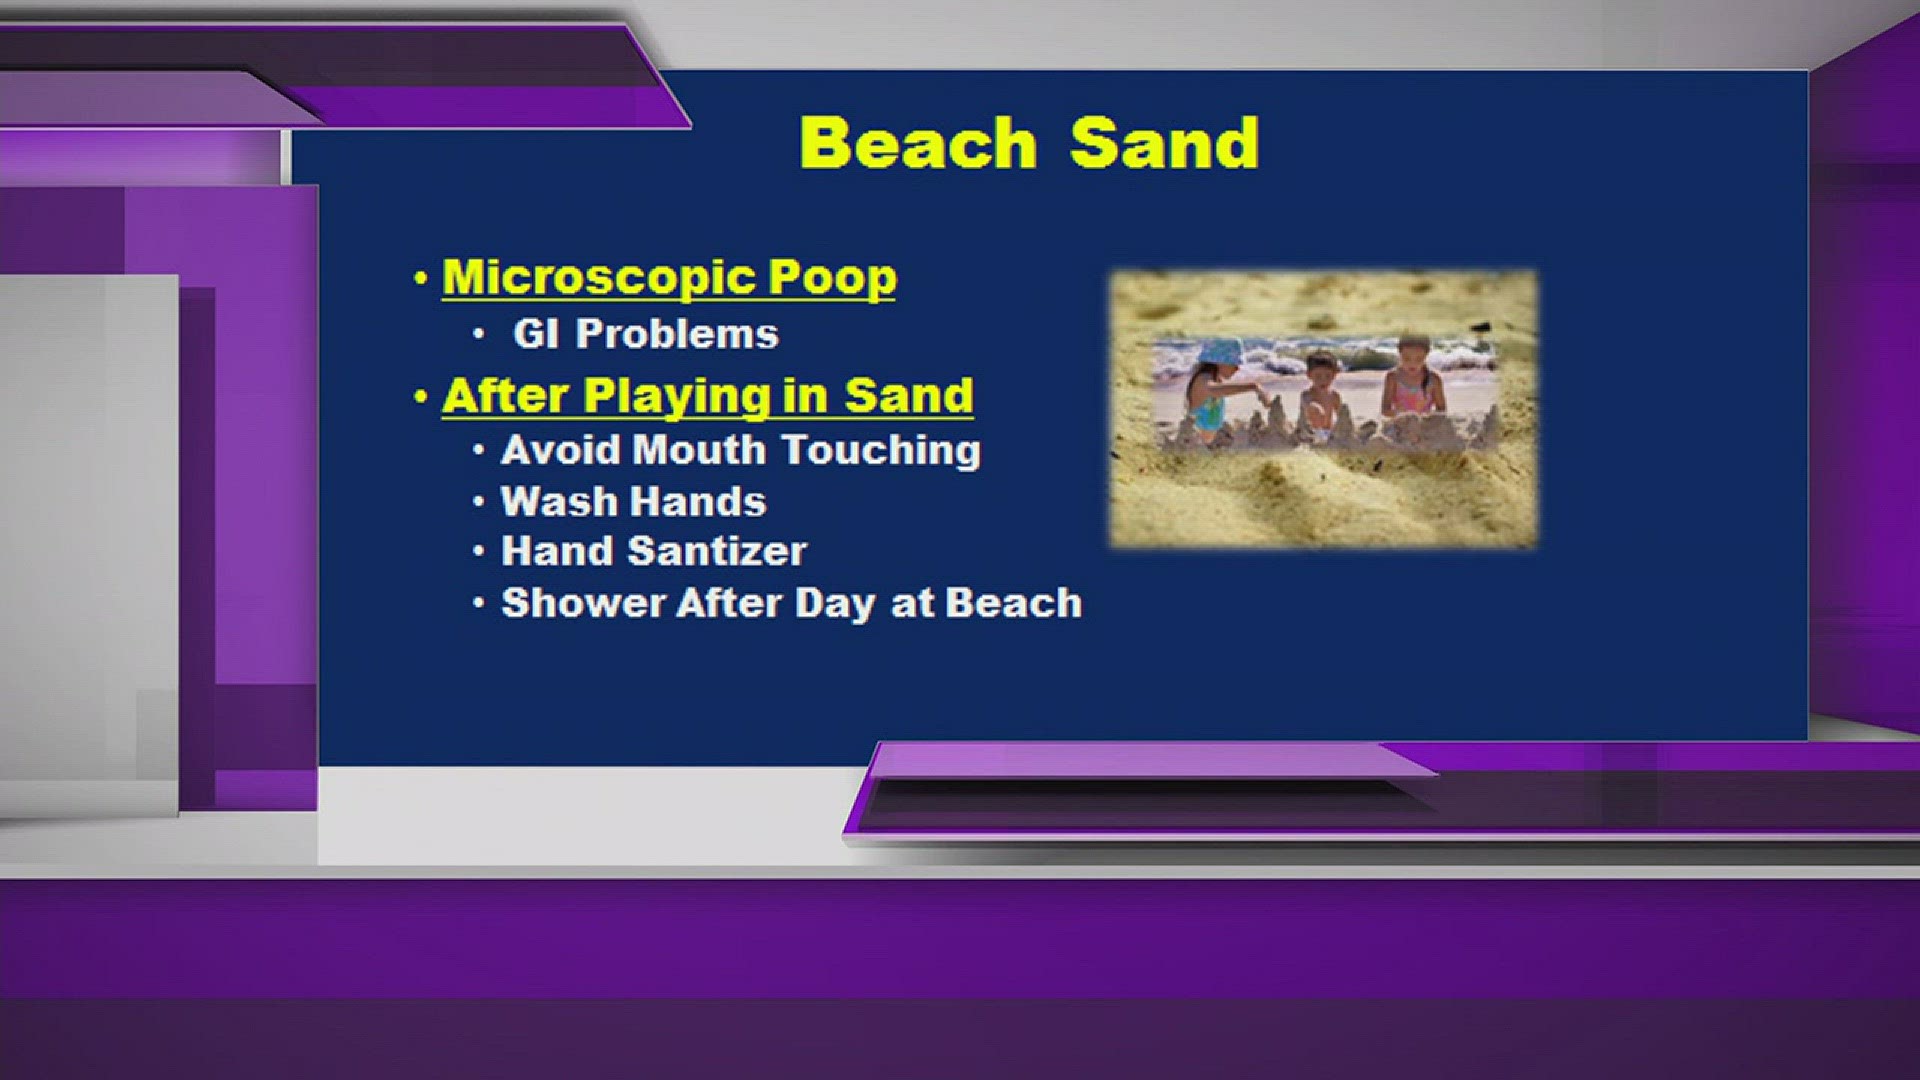 Is the sand at the beach clean? Likely not says Dr. T. Glenn Pait